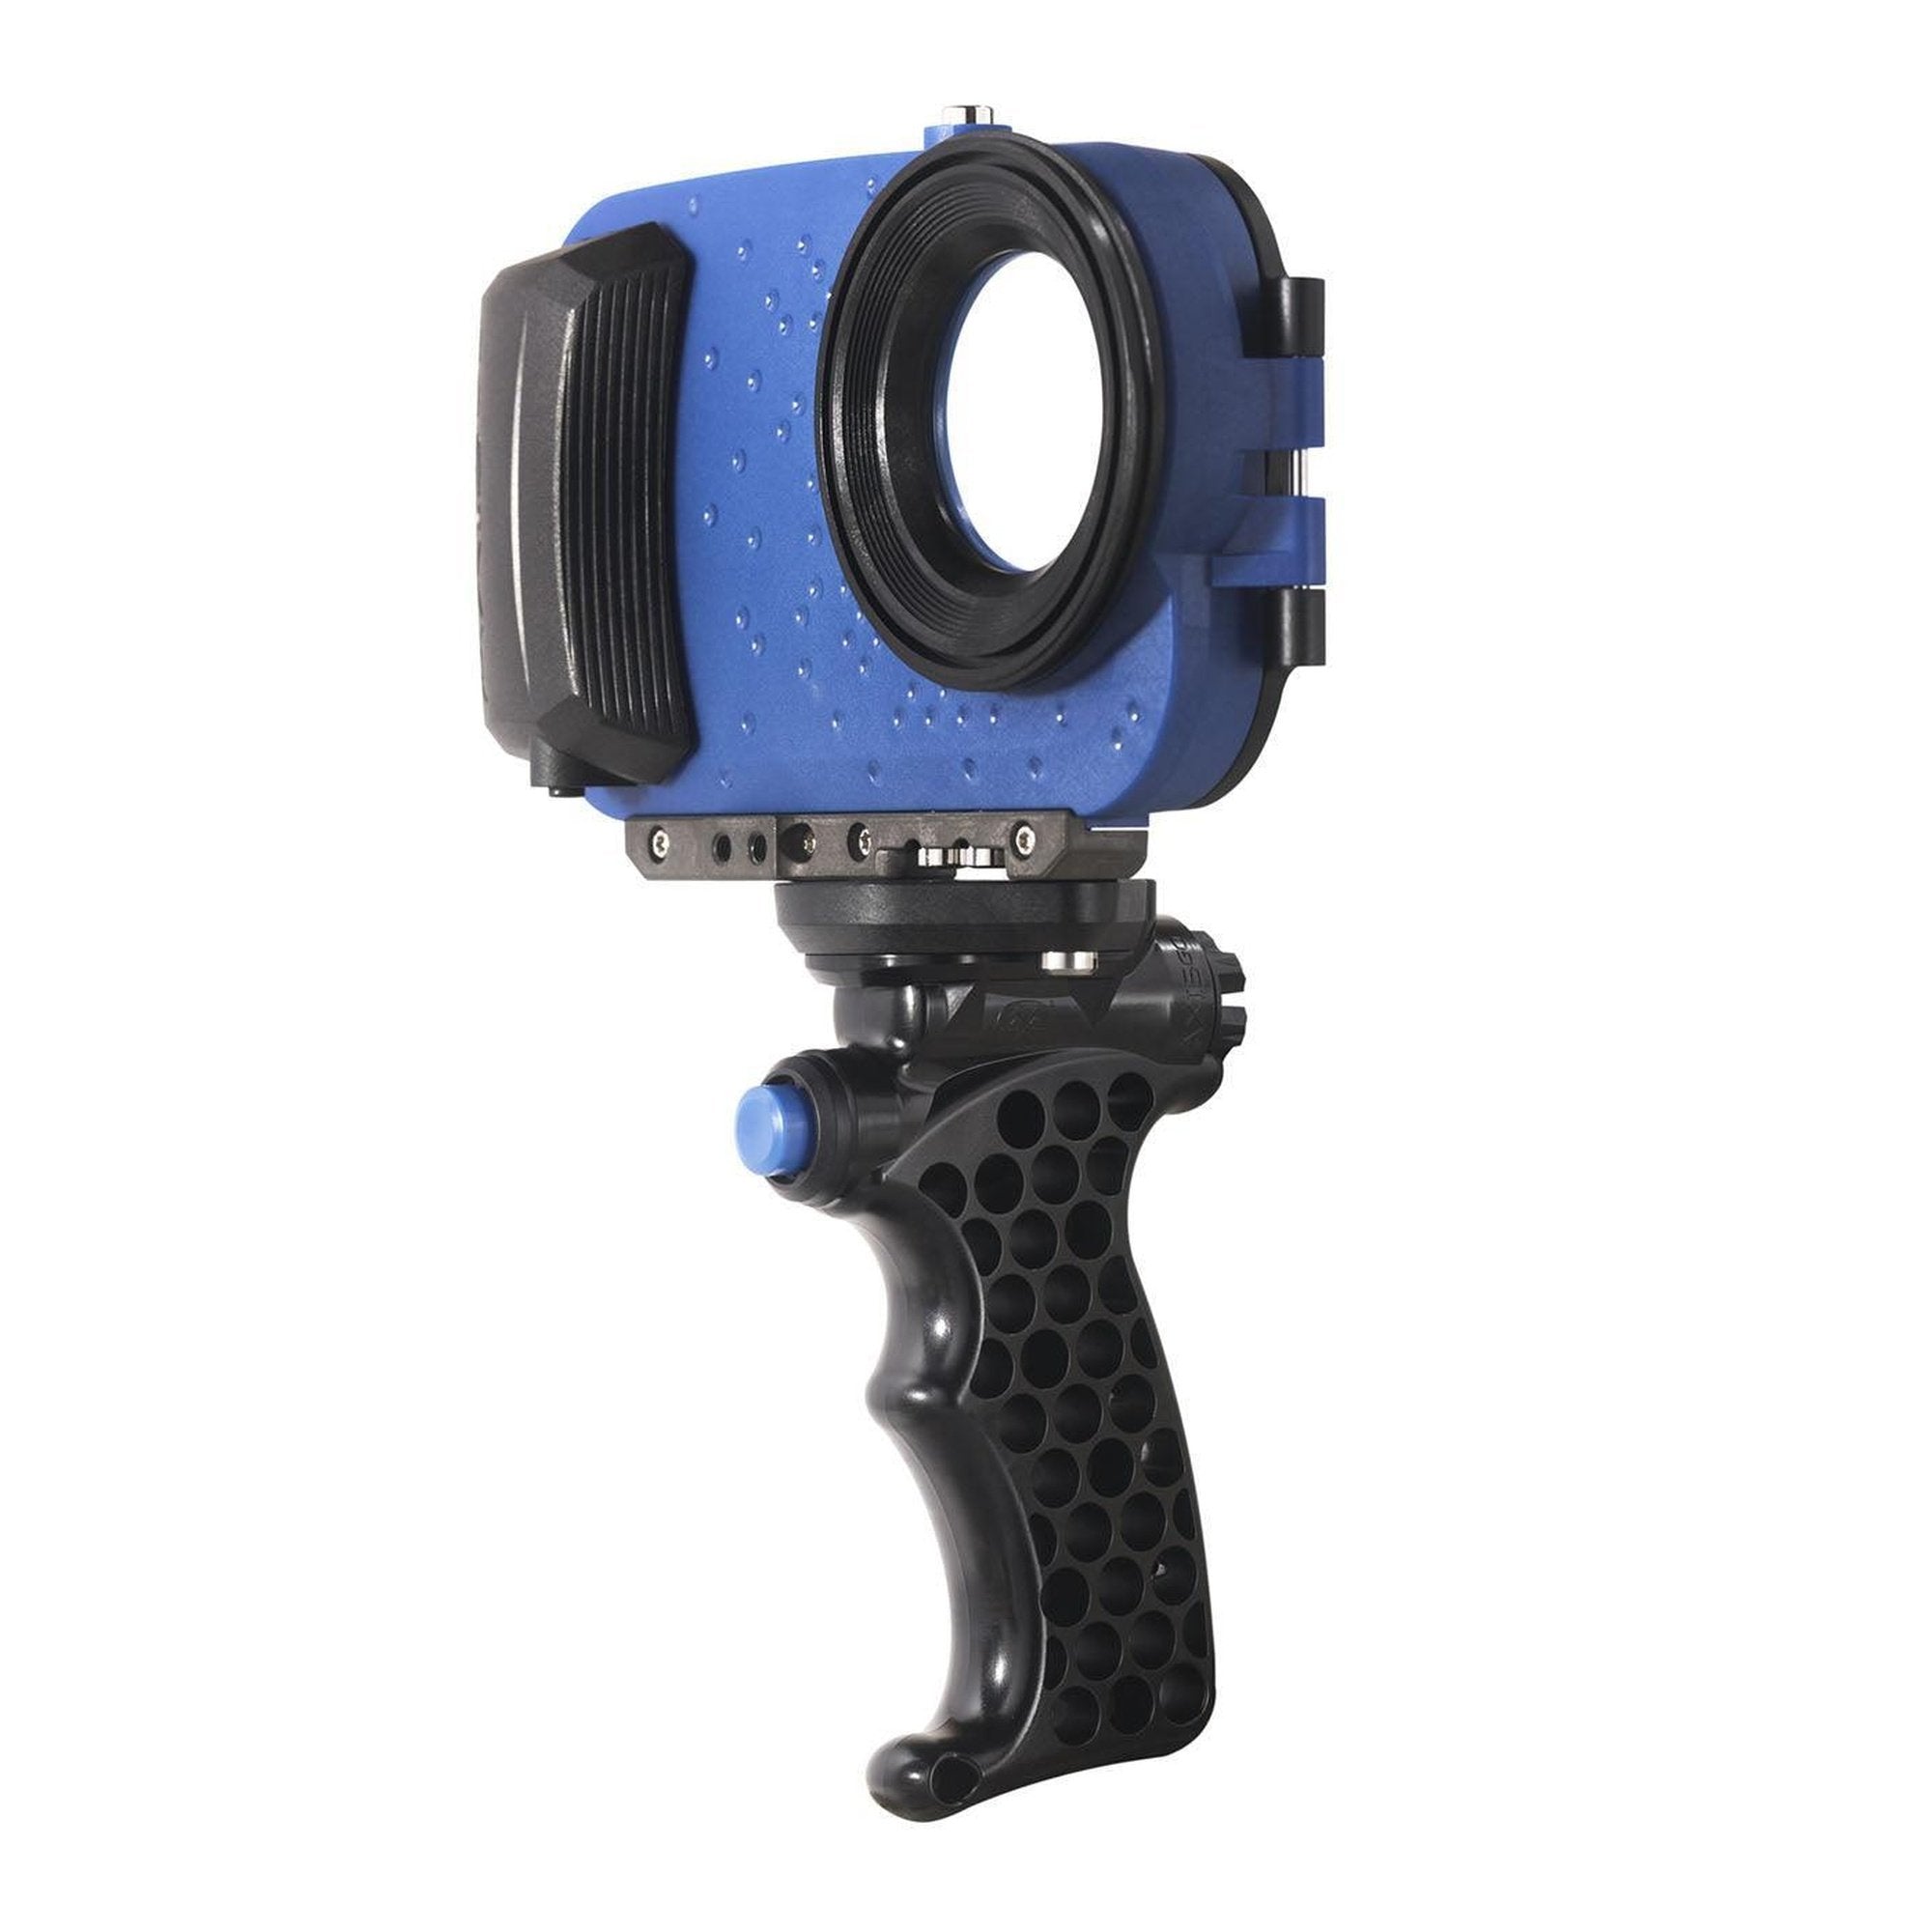 AxisGO Bluetooth Shutter Grip for iPhone – AquaTech Imaging Solutions